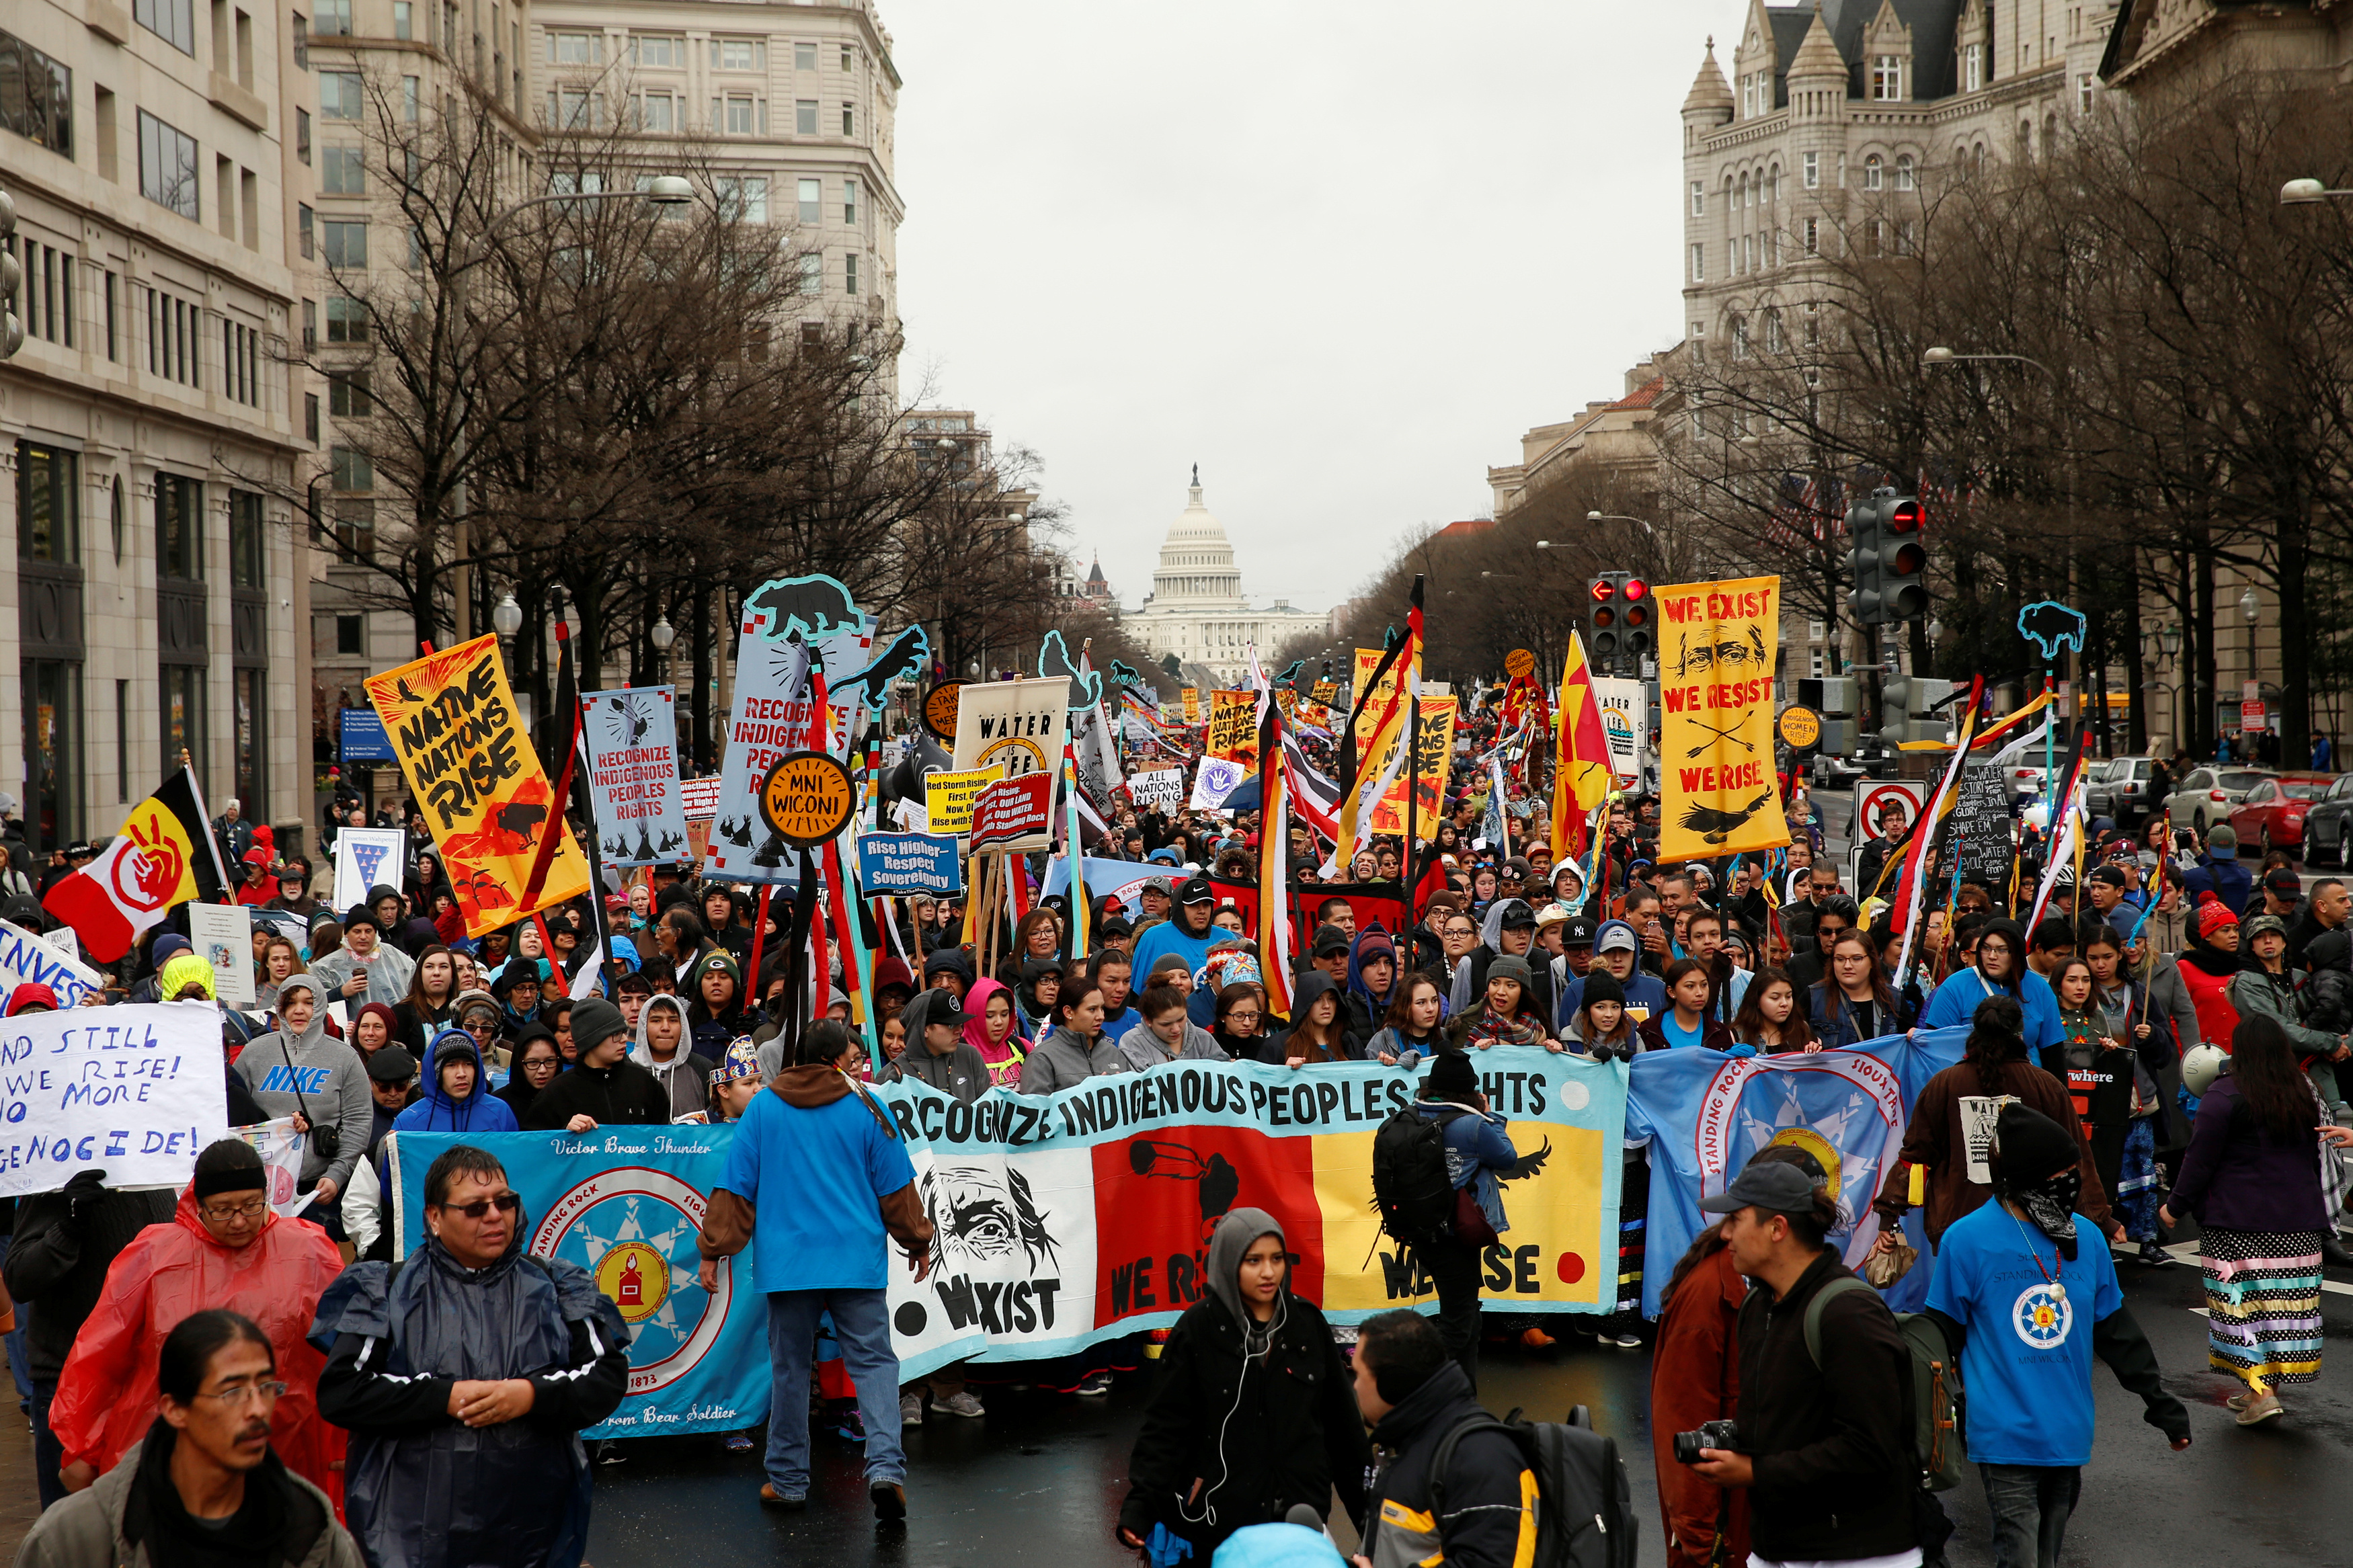 Indigenous leaders participate in protest march and rally in Washington